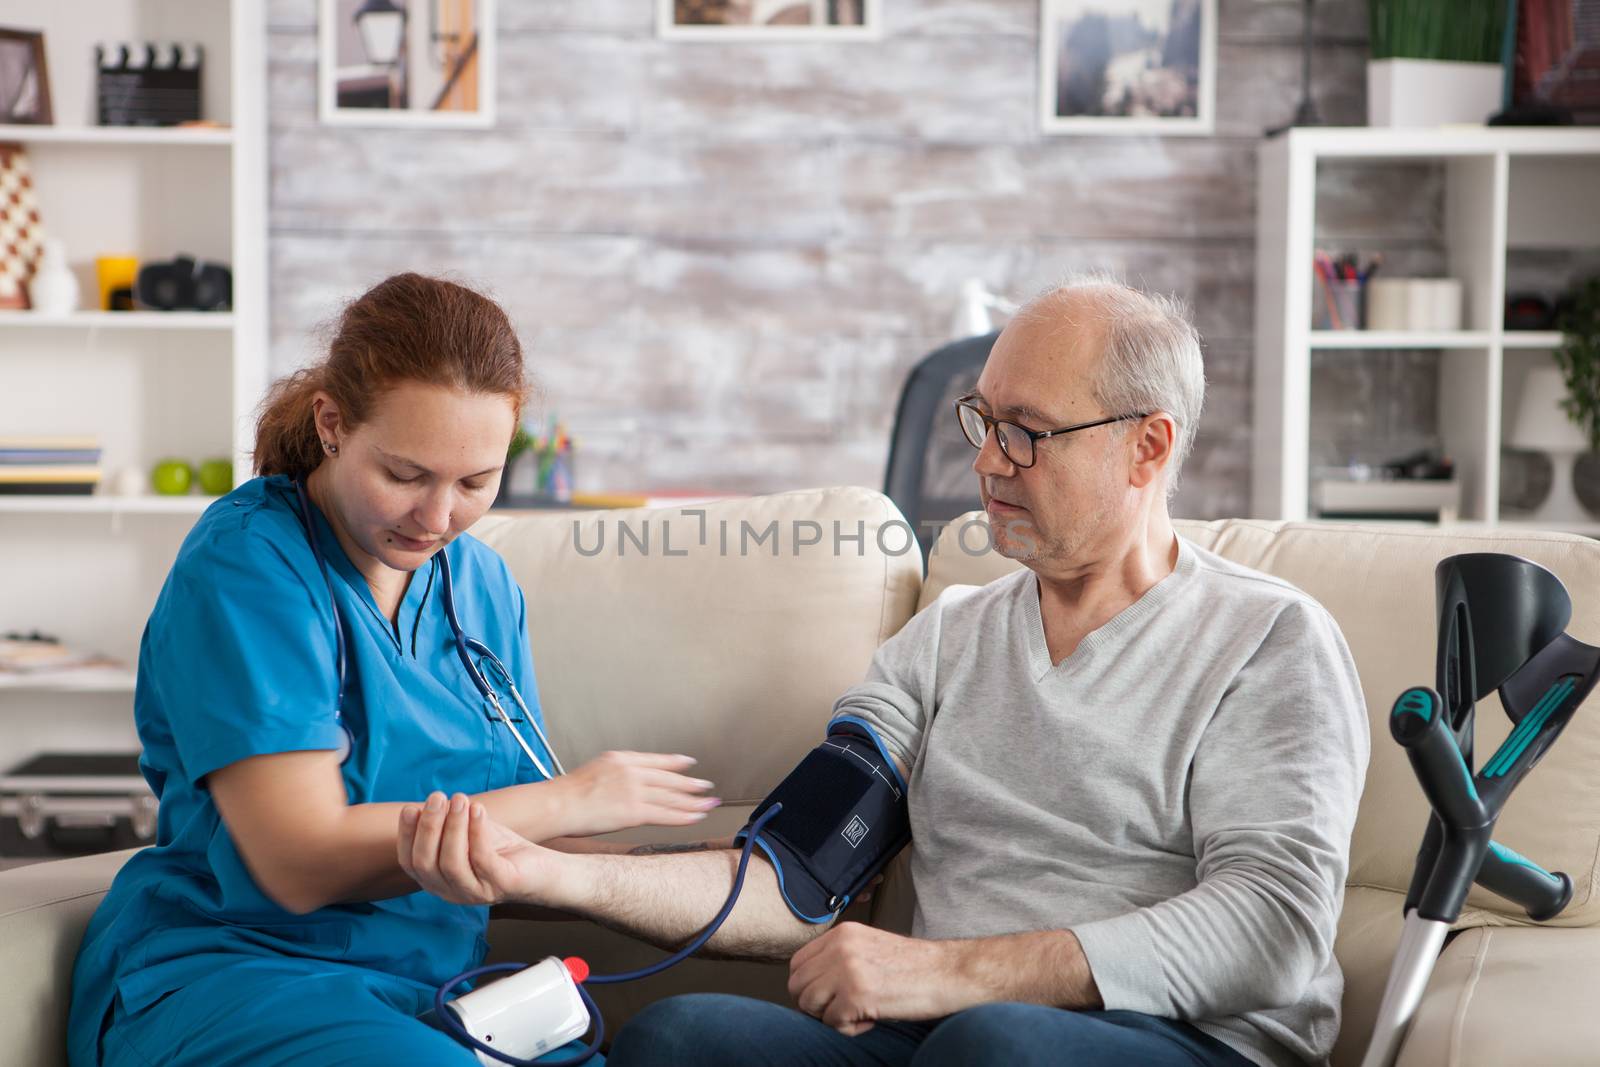 Retired old man sitting on couch in nursing home while female doctor is taking blood pressure using a digital device.